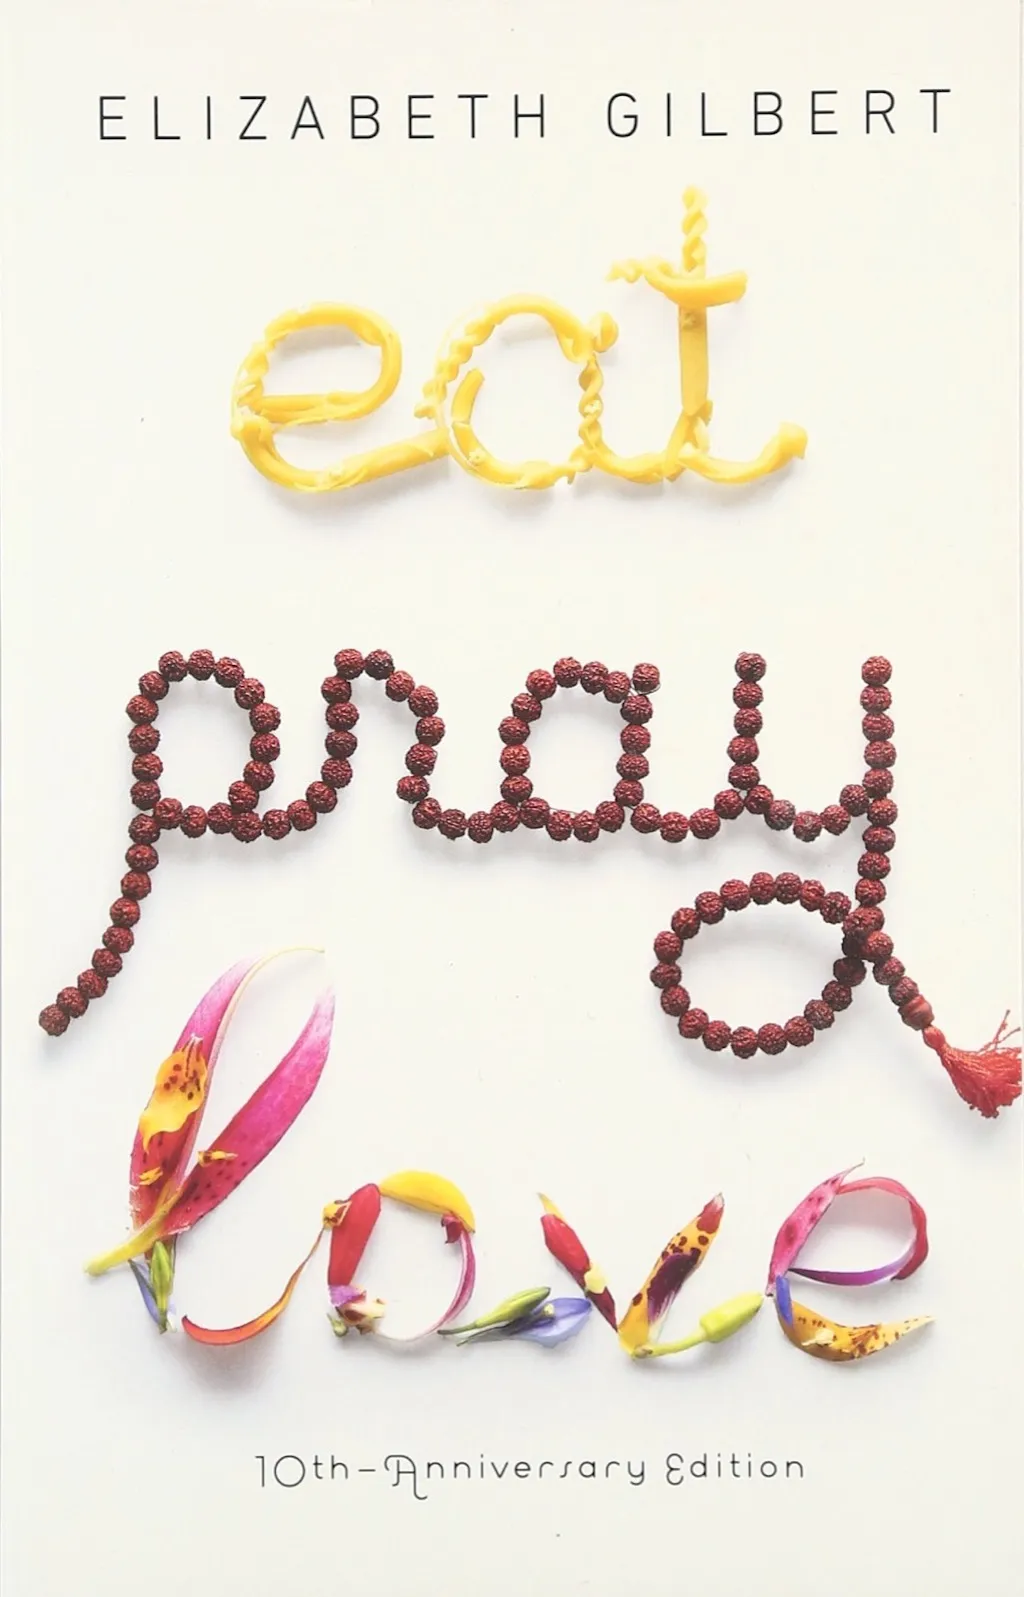 Eat Pray Love books every woman should read in her 40s